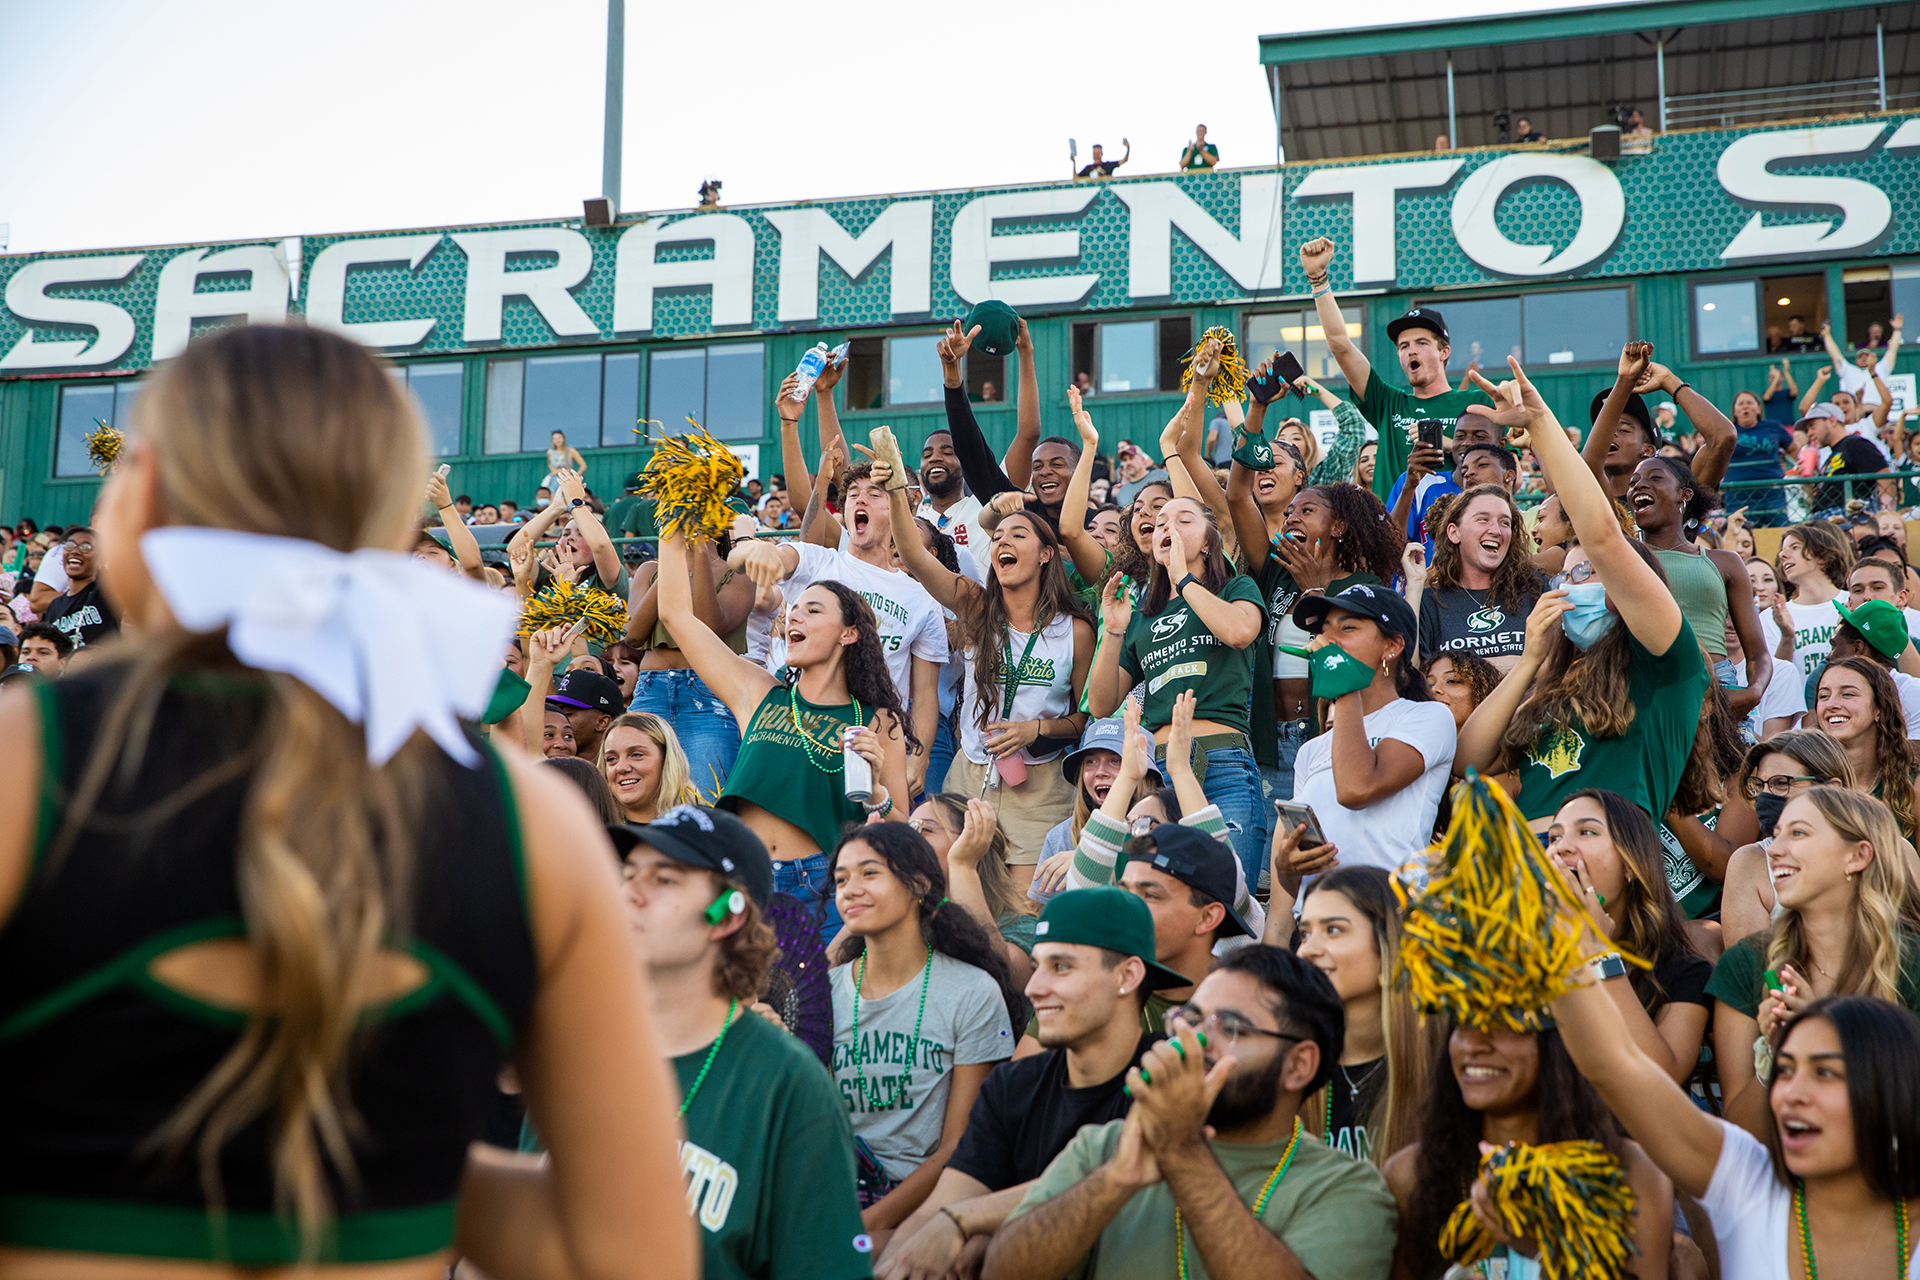 Students, staff, faculty, and members of the community cheer on the record-setting Sac State Hornets football team.